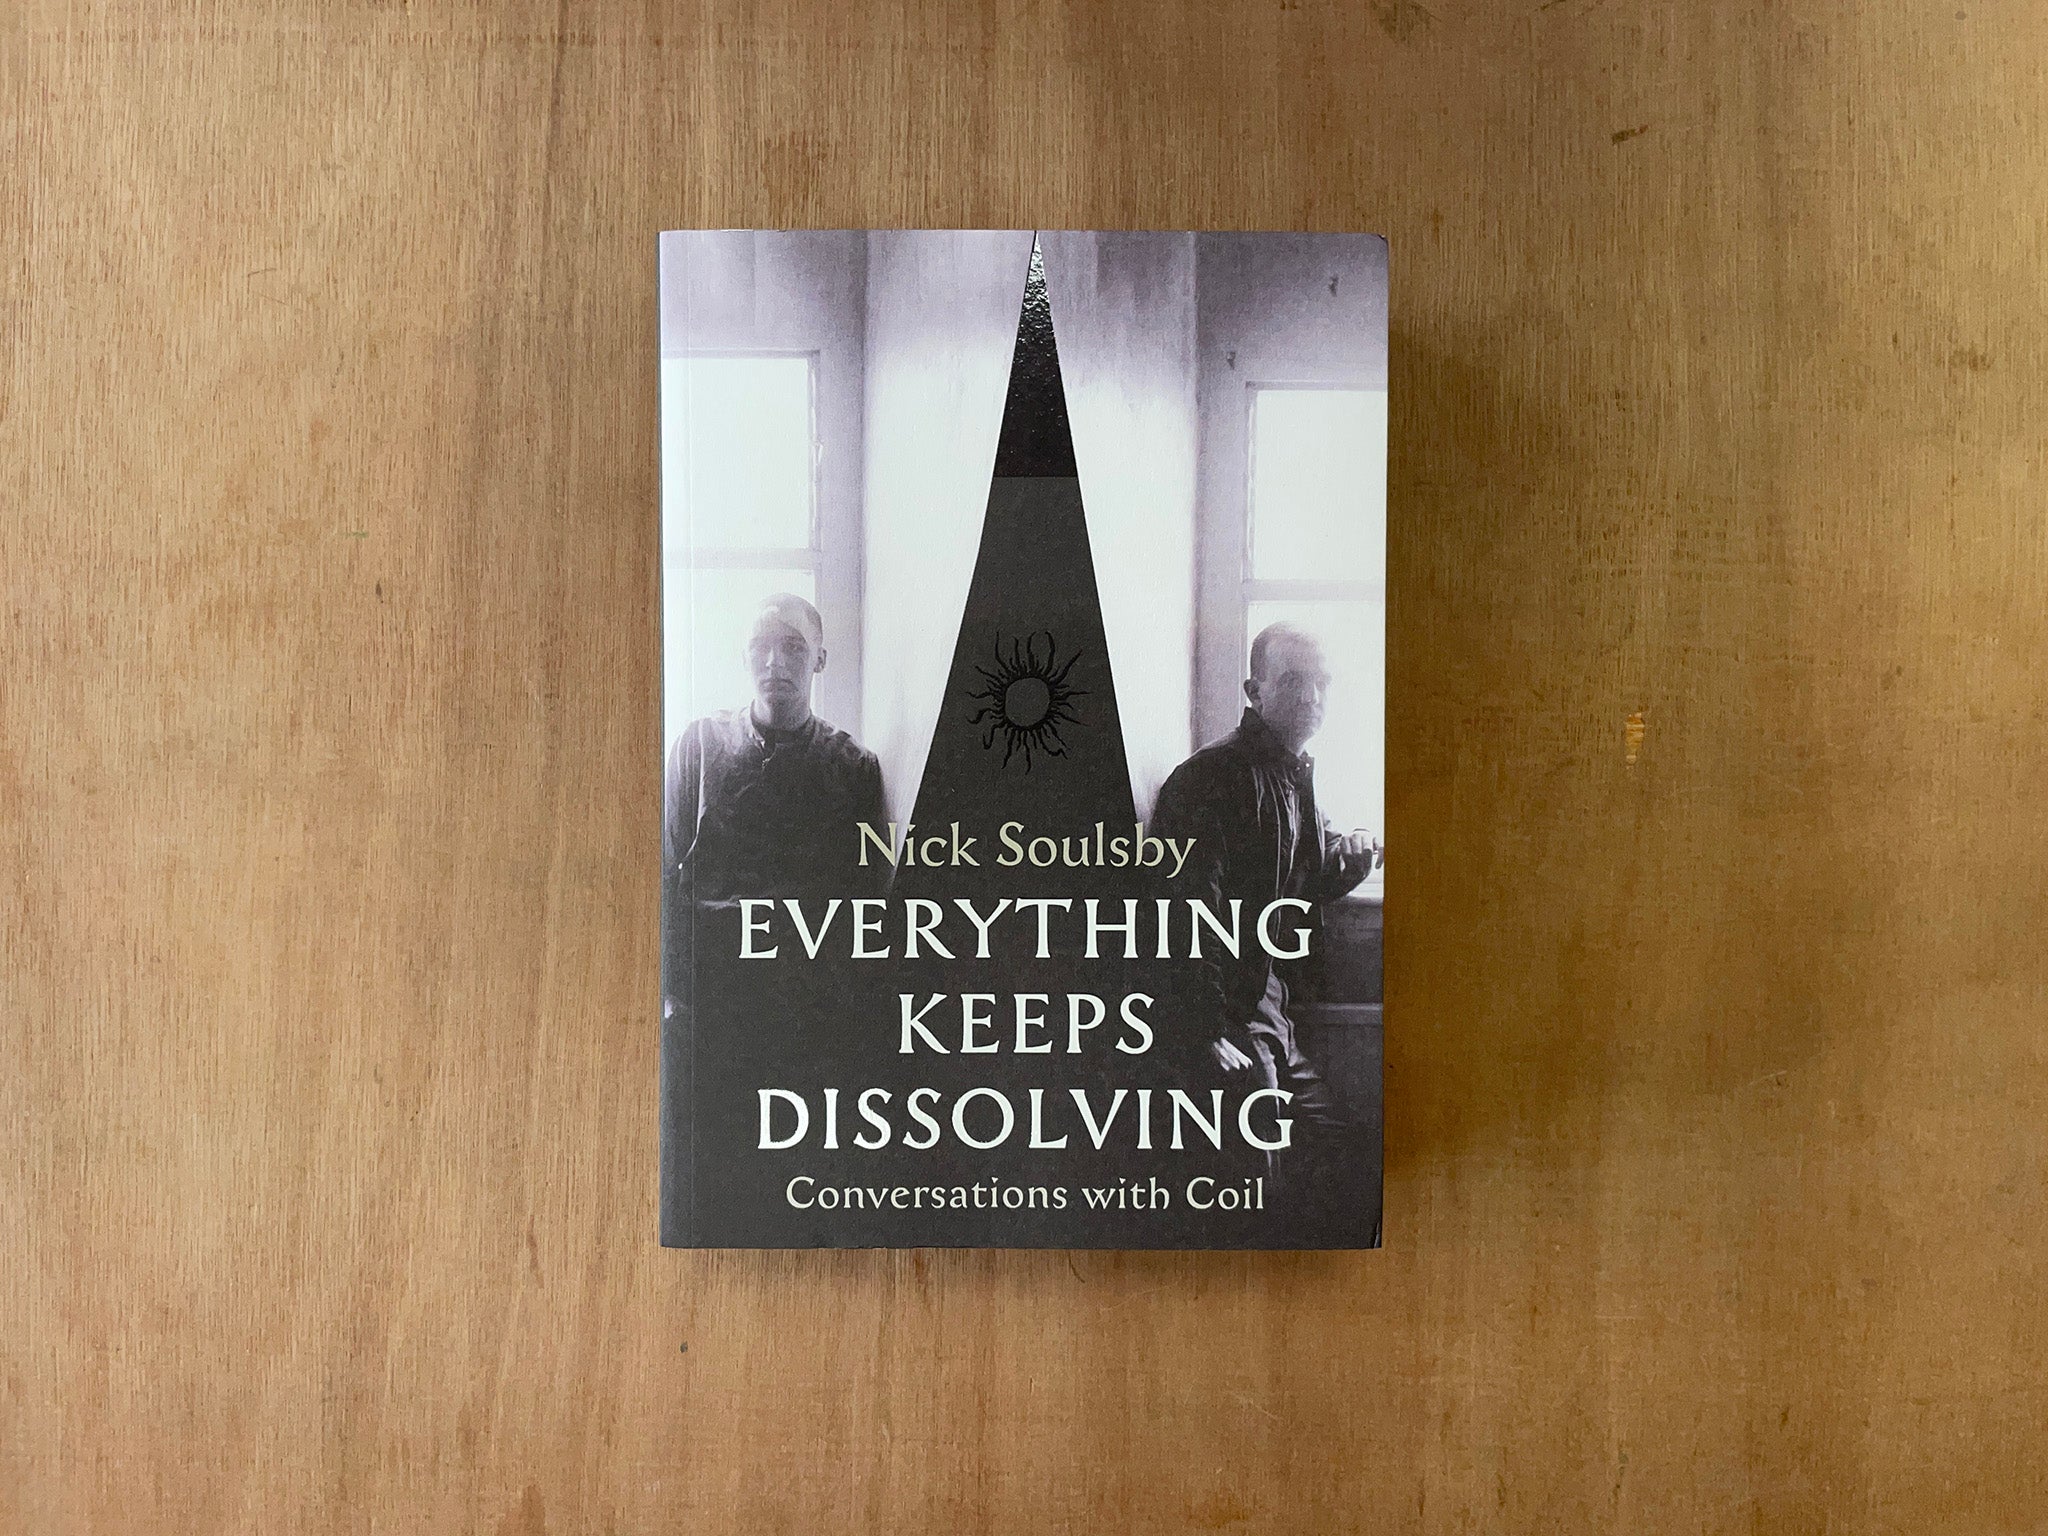 EVERYTHING KEEPS DISSOLVING: CONVERSATIONS WITH COIL by Nick Soulsby